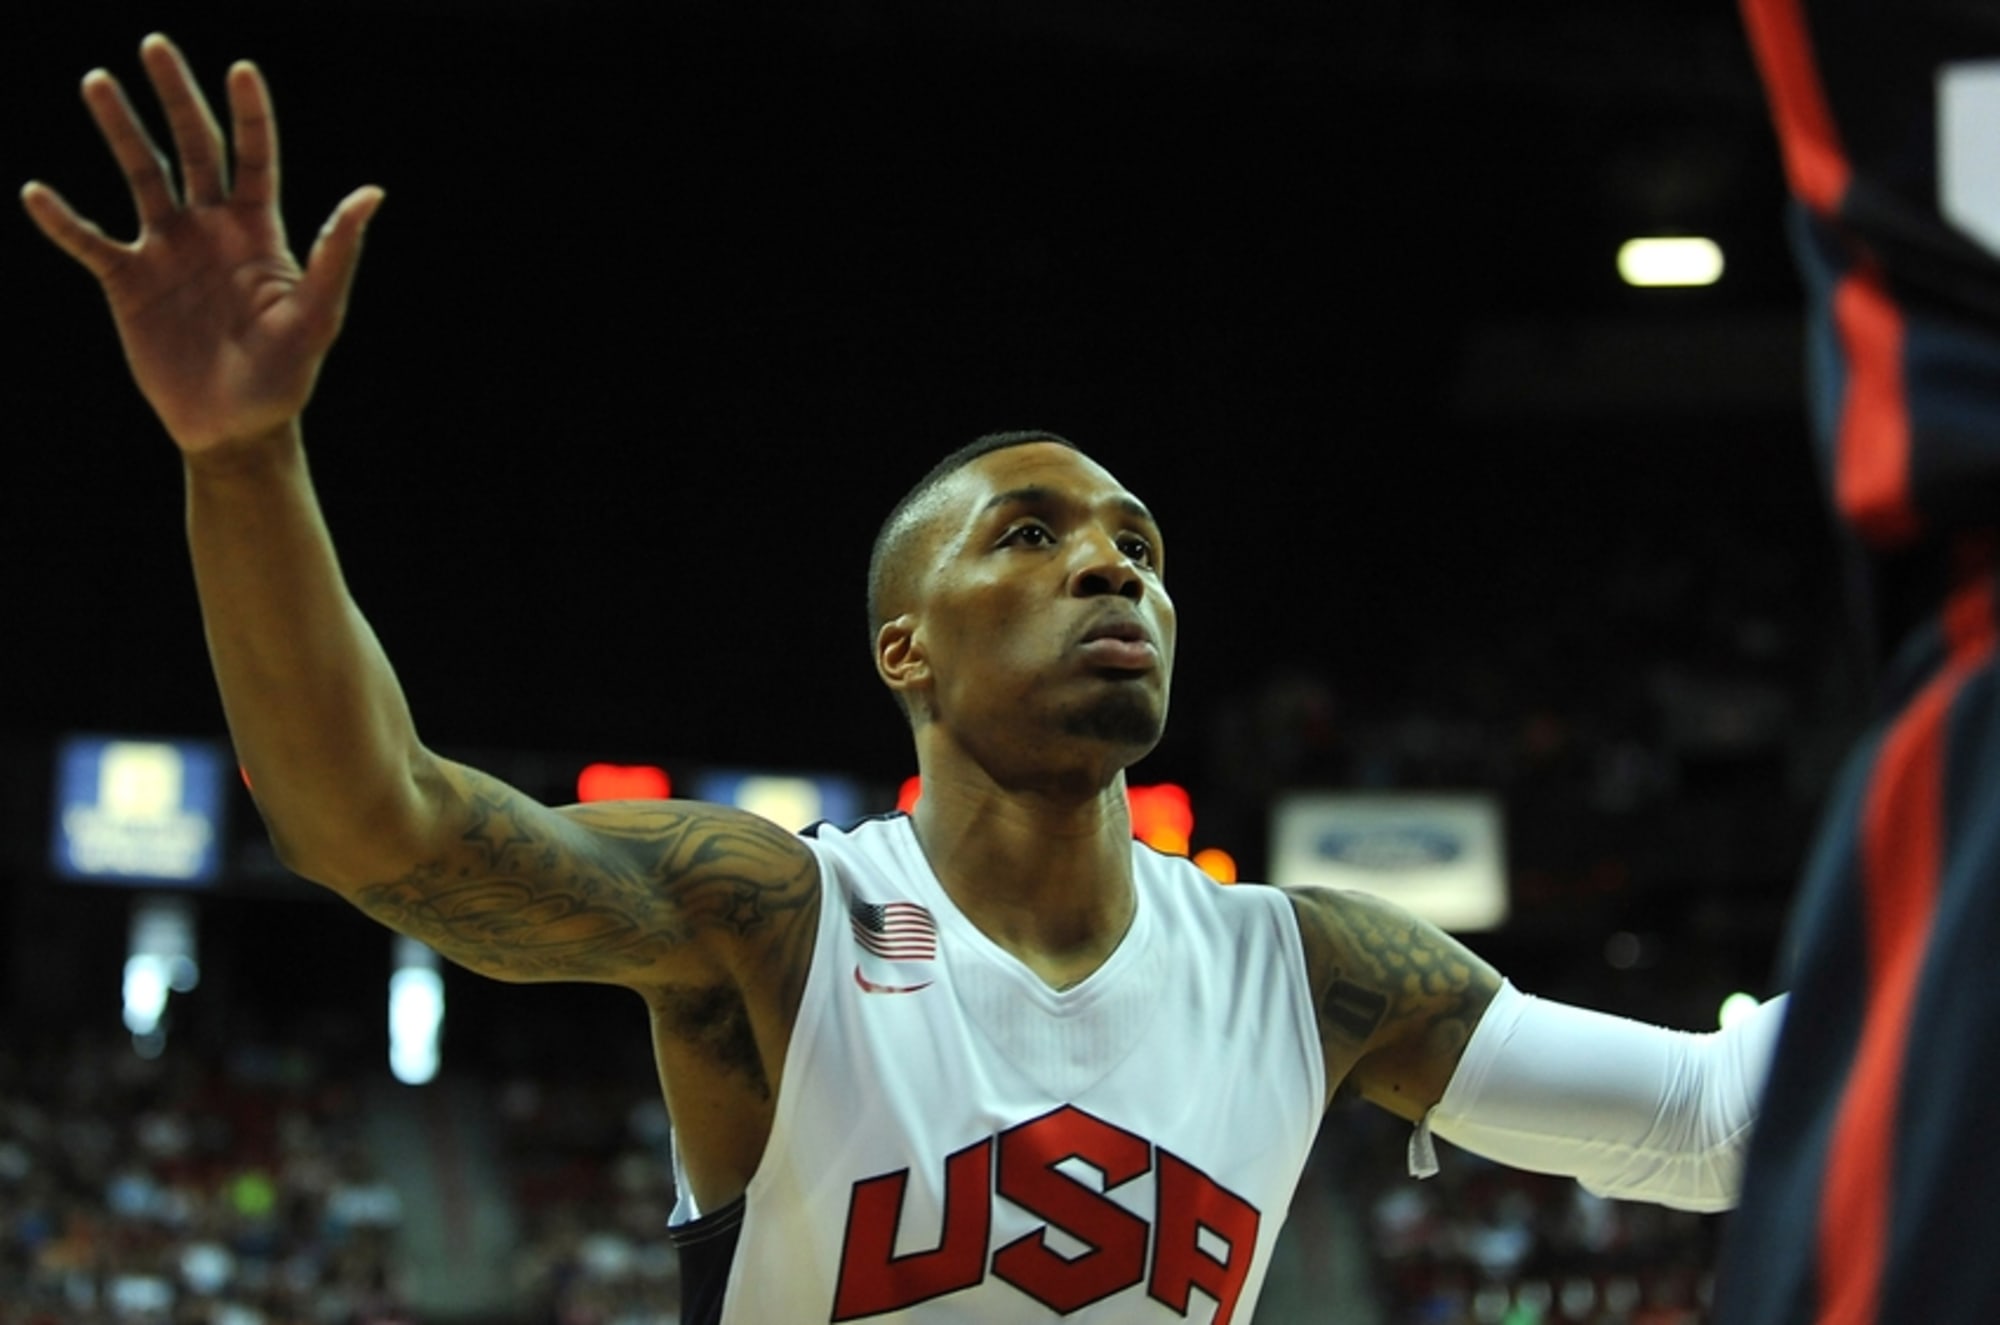 The Meanings Behind The 12 Coolest Tattoos In The NBA